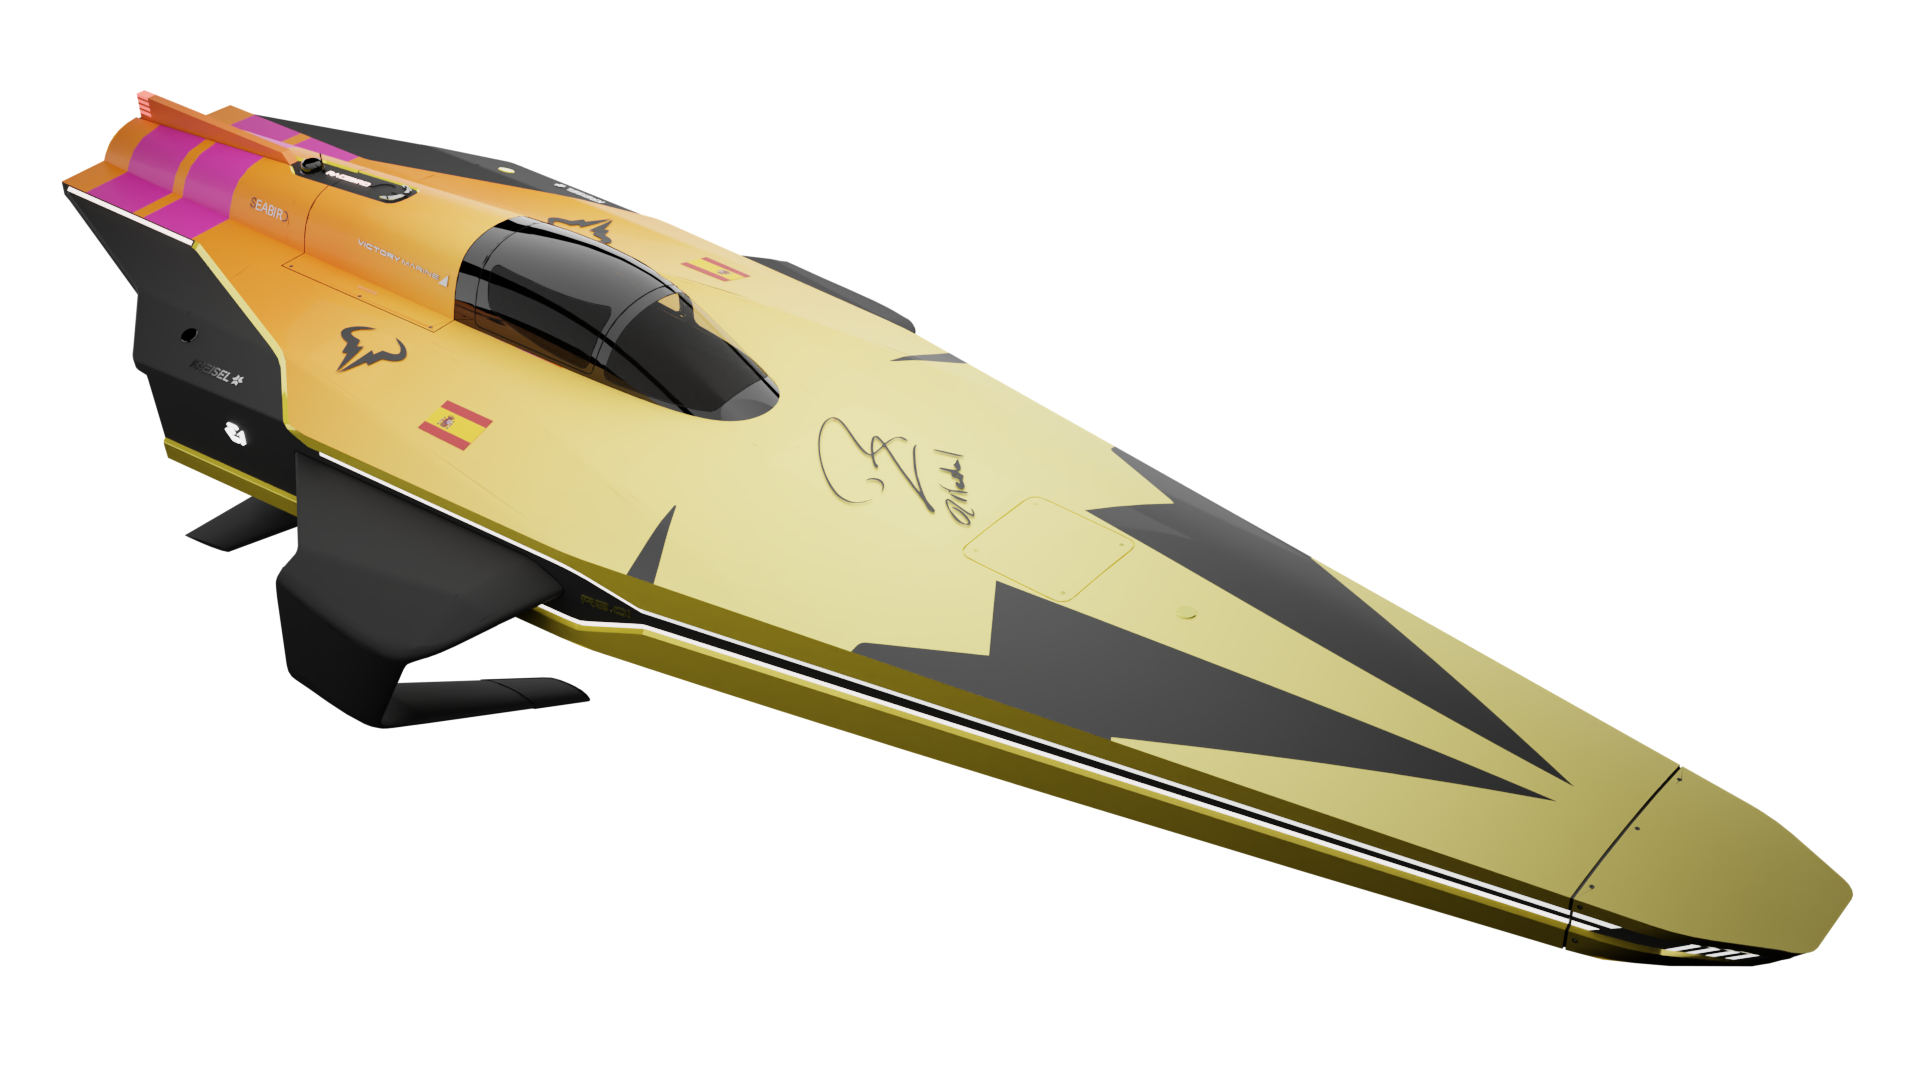 The-E1-electric-raceboat-with-a-livery-inspired-by-the-colour-scheme-of-Nadals-tennis-racket